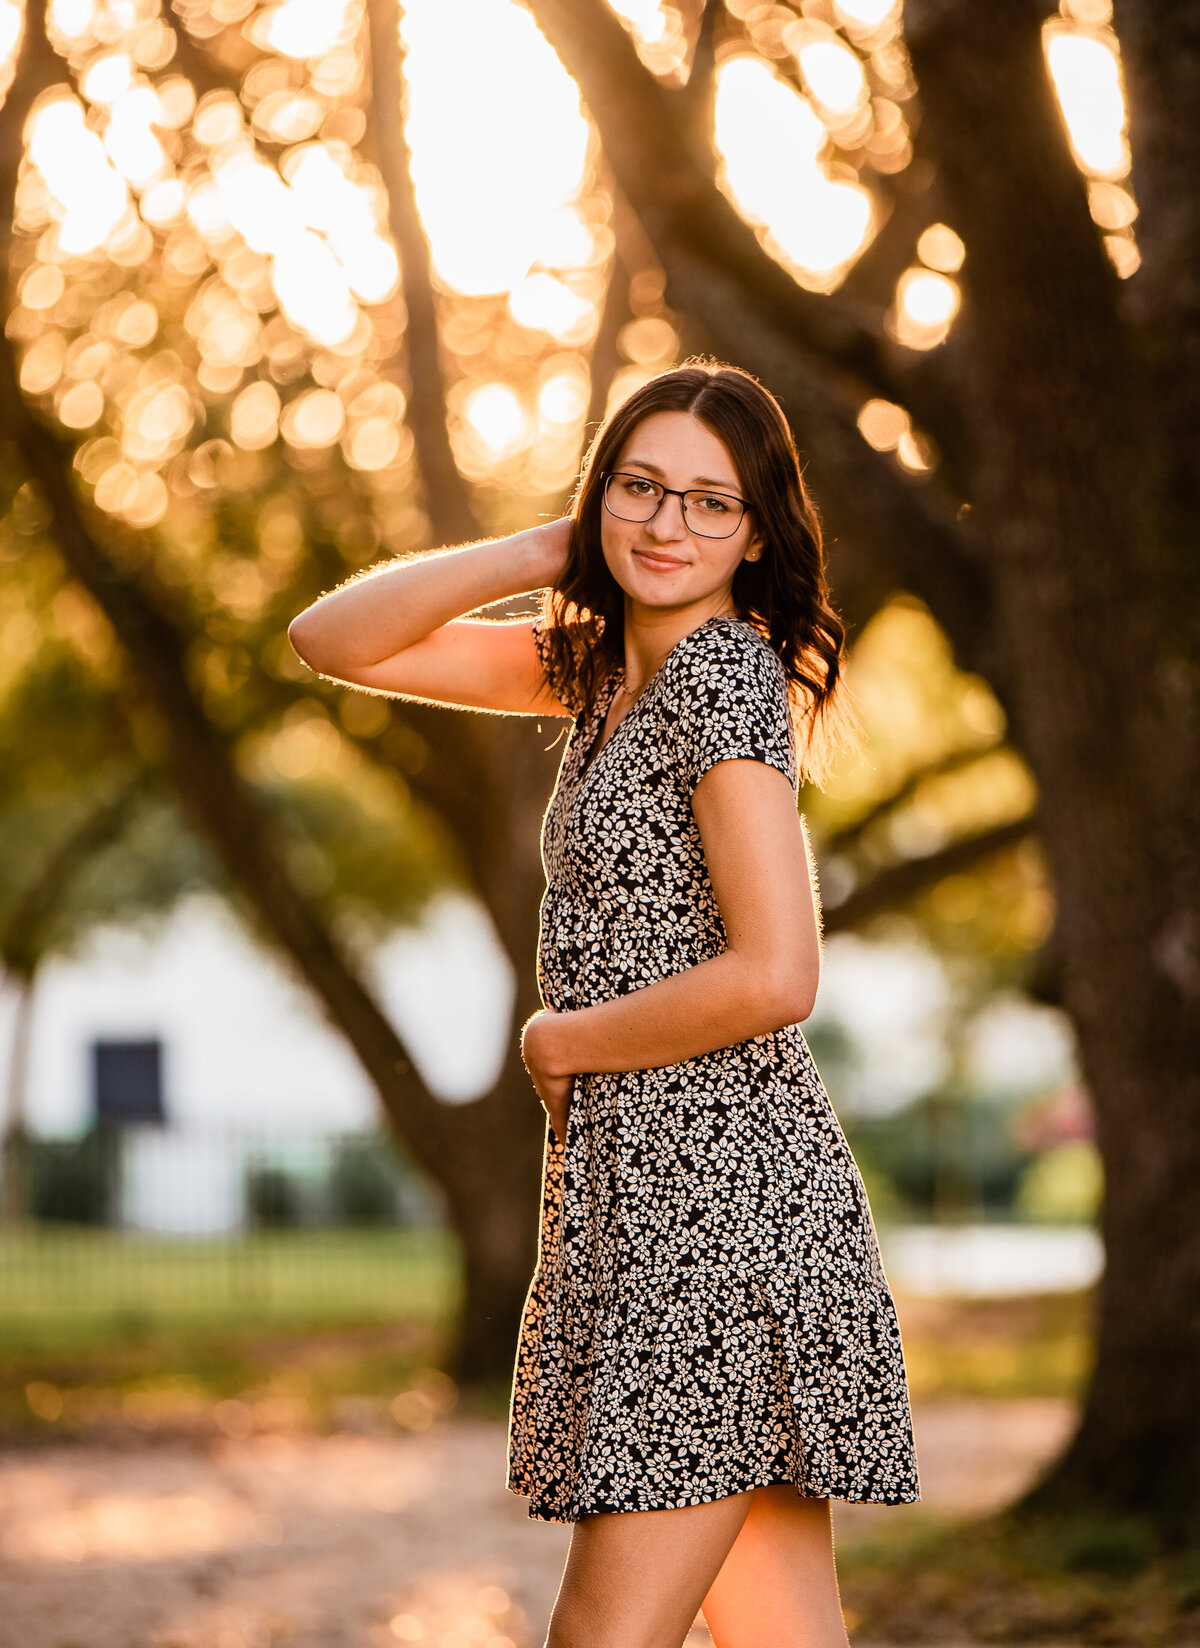 A Houston area graduate stands under a canopy of trees with sunset shining behind her.